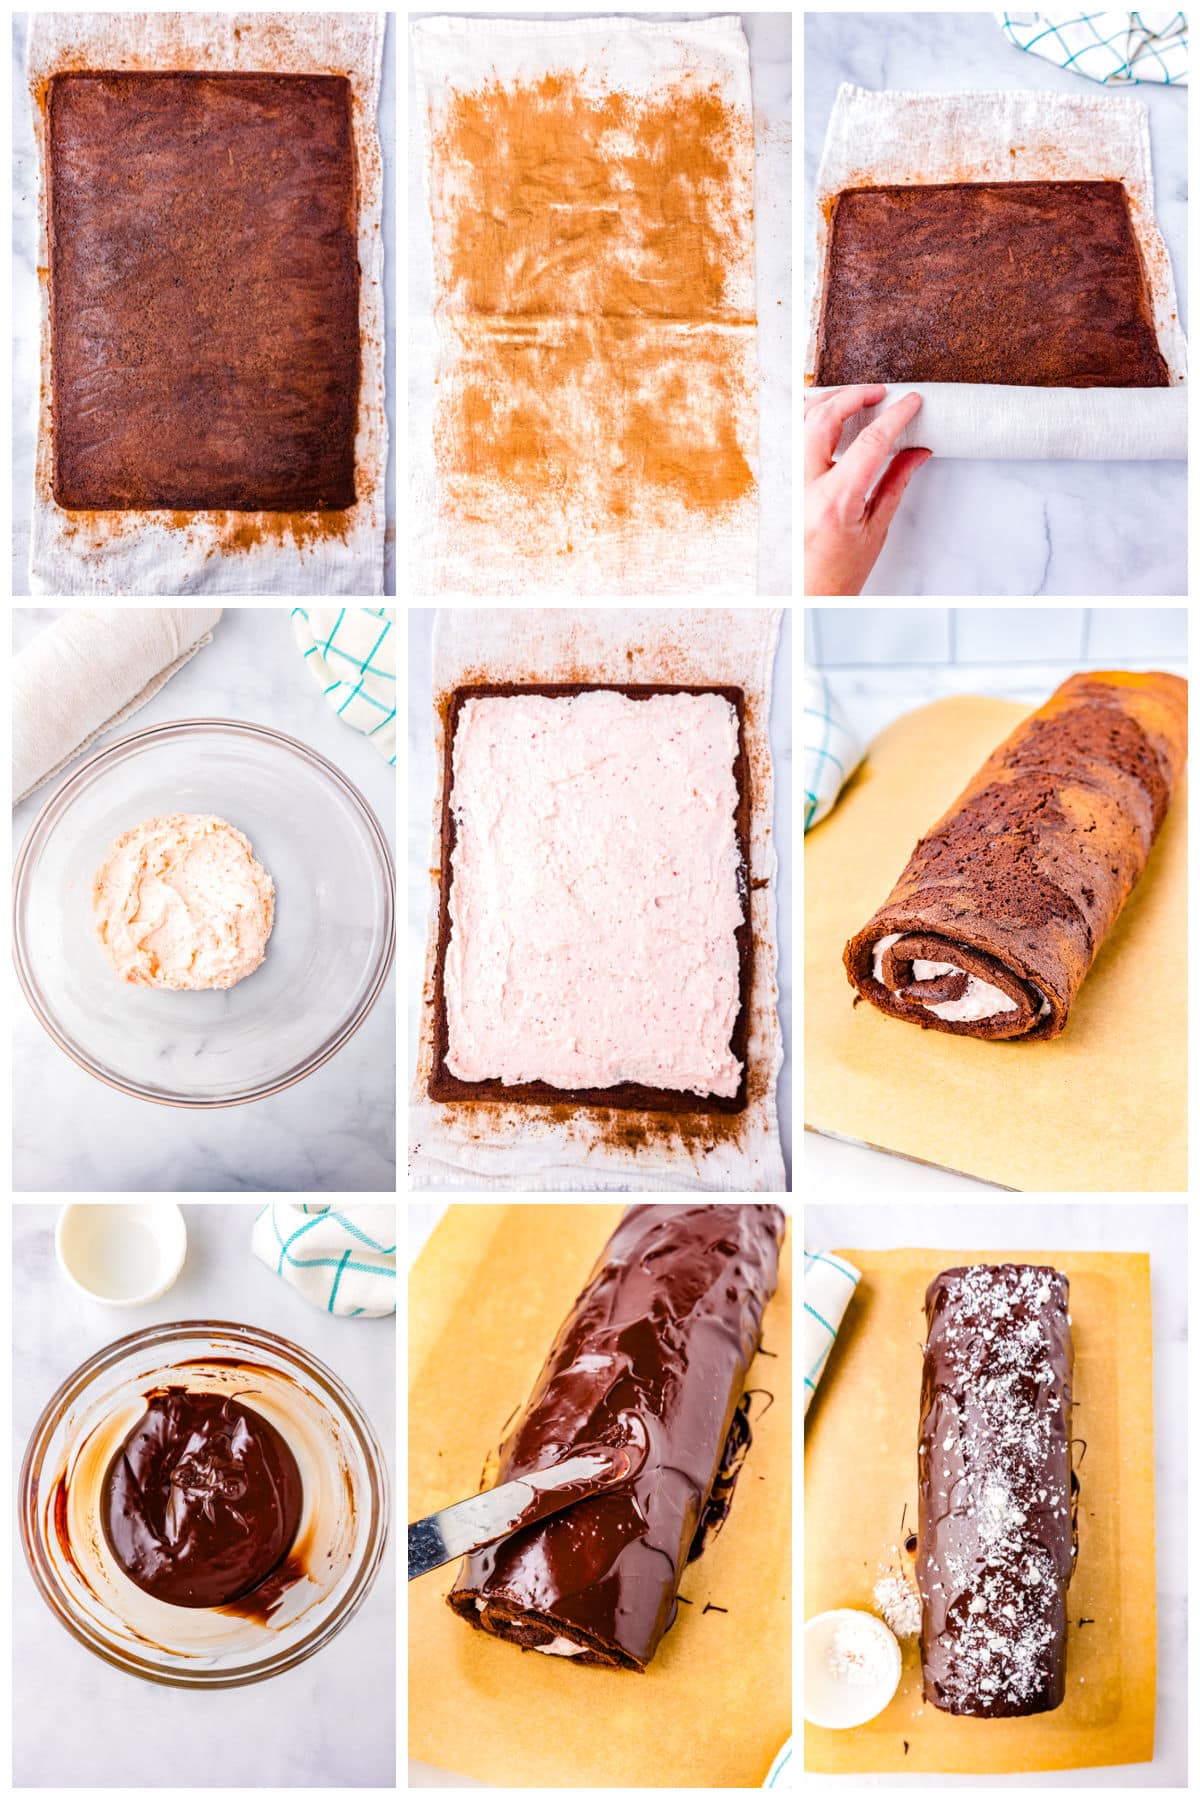 A picture collage showing how to assemble this cake.